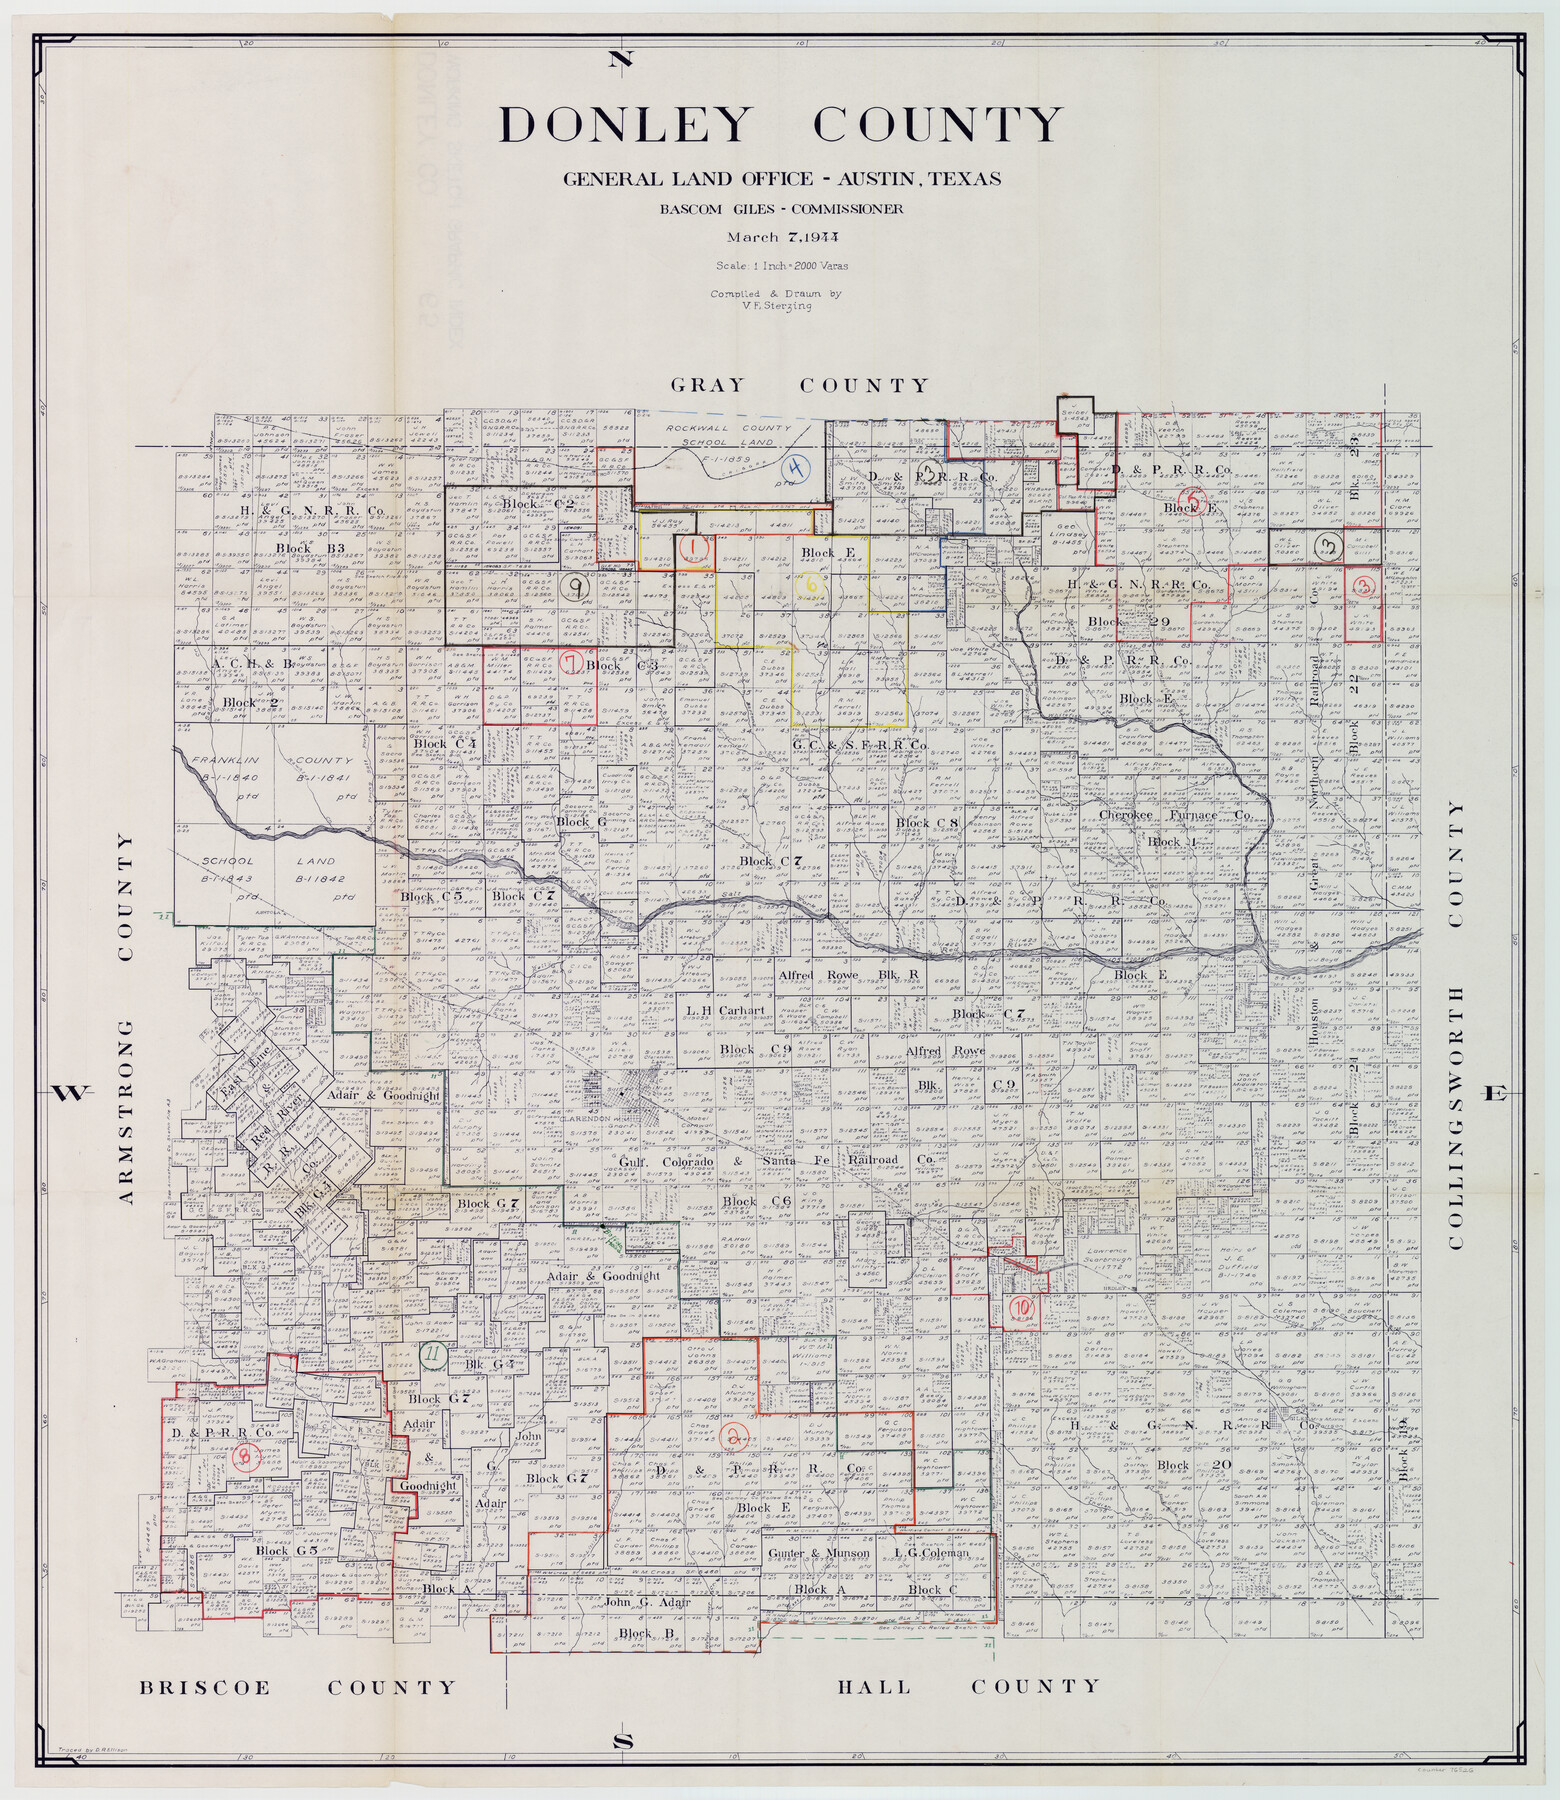 76526, Donley County Working Sketch Graphic Index, General Map Collection